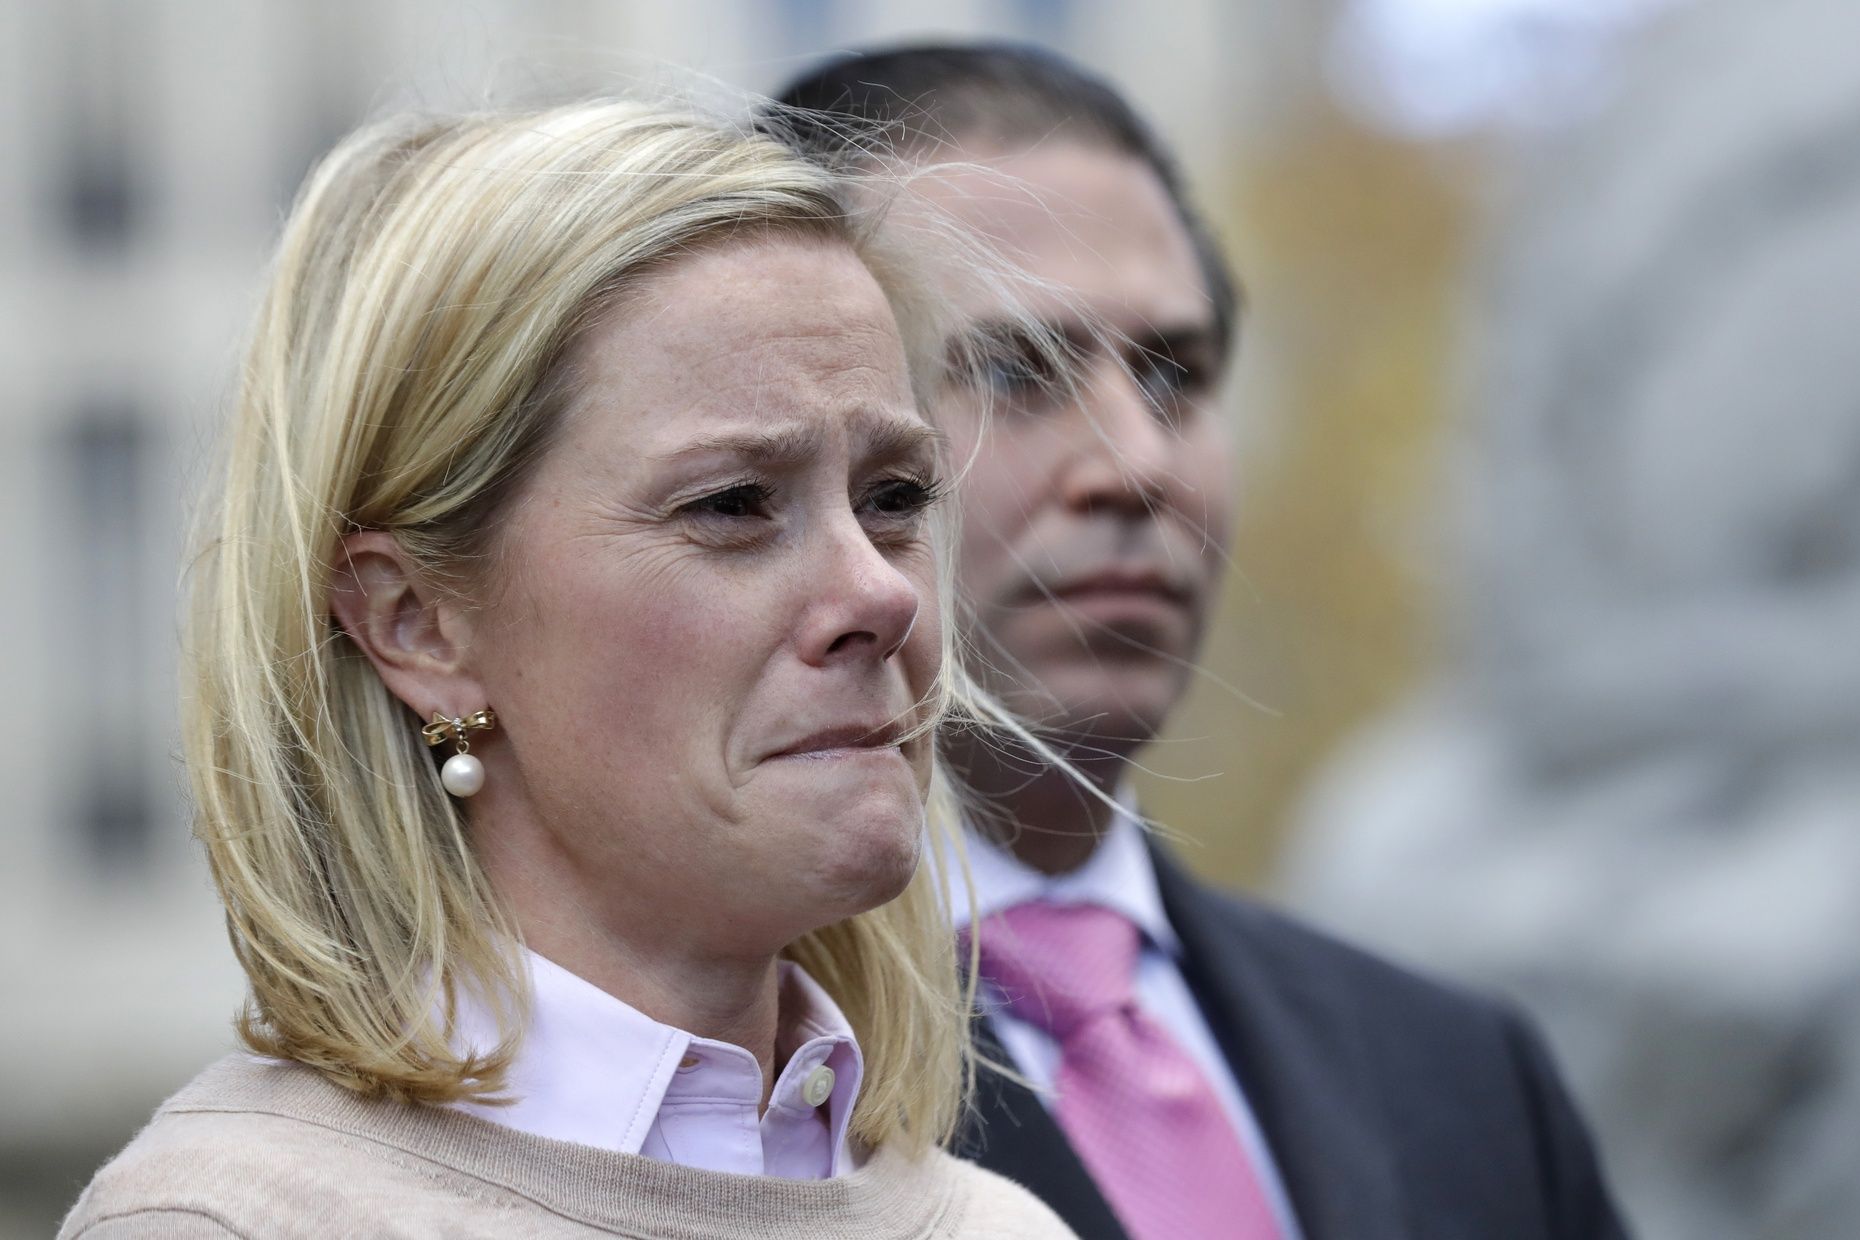 Bridget Anne Kelly is one of two former Christie aides found guilty of conspiracy